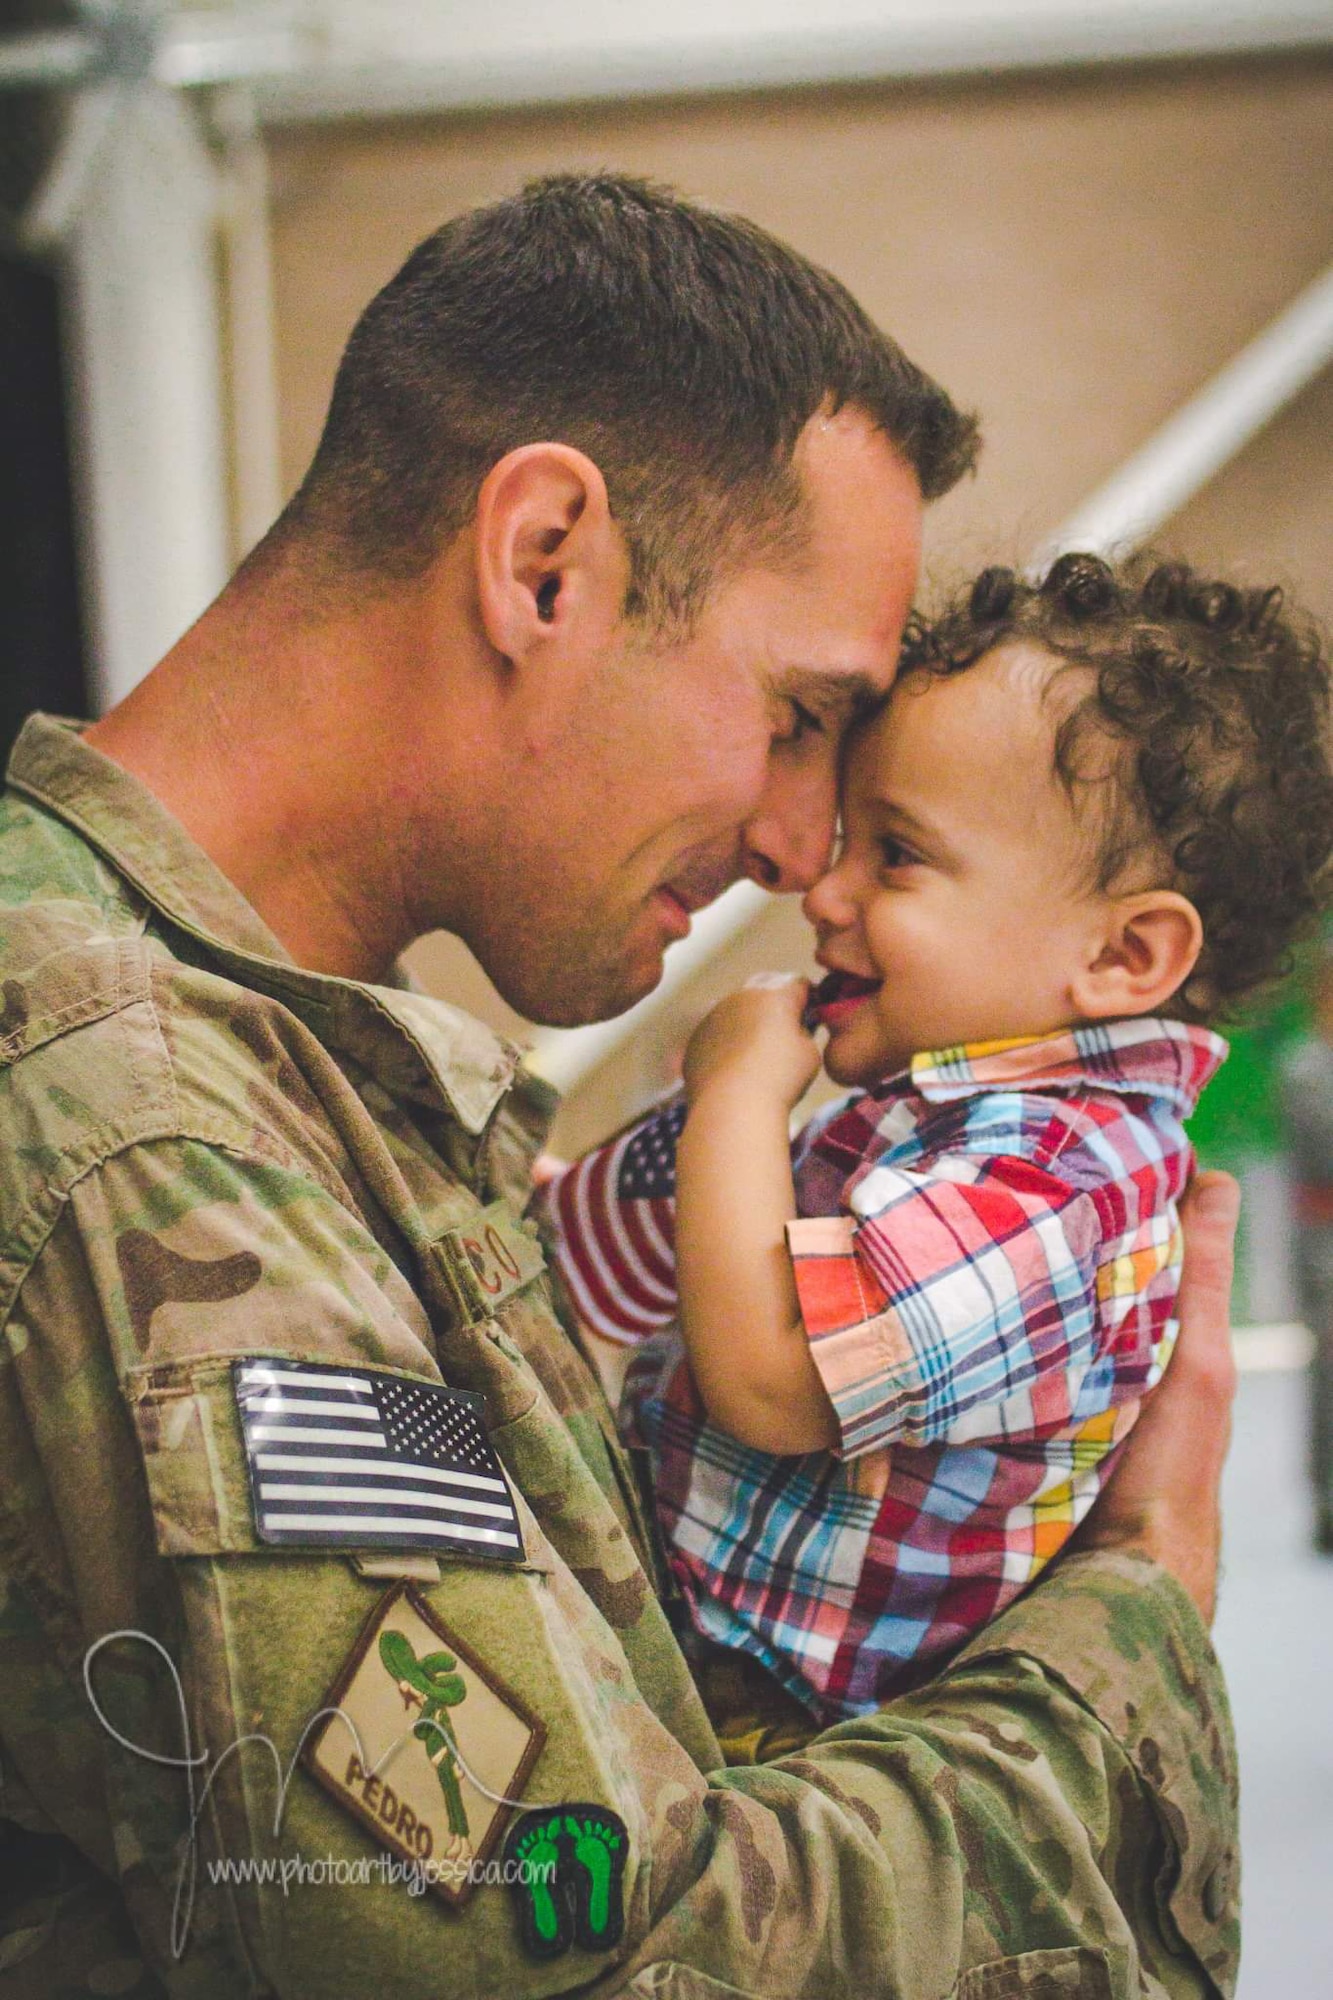 U.S. Air Force Tech. Sgt. Joshua Cunico, 373rd Training Squadron military training unit flight chief, holds back tears when he sees his child, Joshua Jr., 1, after returning from a deployment to Afghanistan in October 2014 at Davis-Monthan Air Force Base, Arizona. Cunico and his family cherish Father’s Day this year because they get to spend it together. Cunico has deployed twice since becoming a dad in 2014. (Courtesy photo)